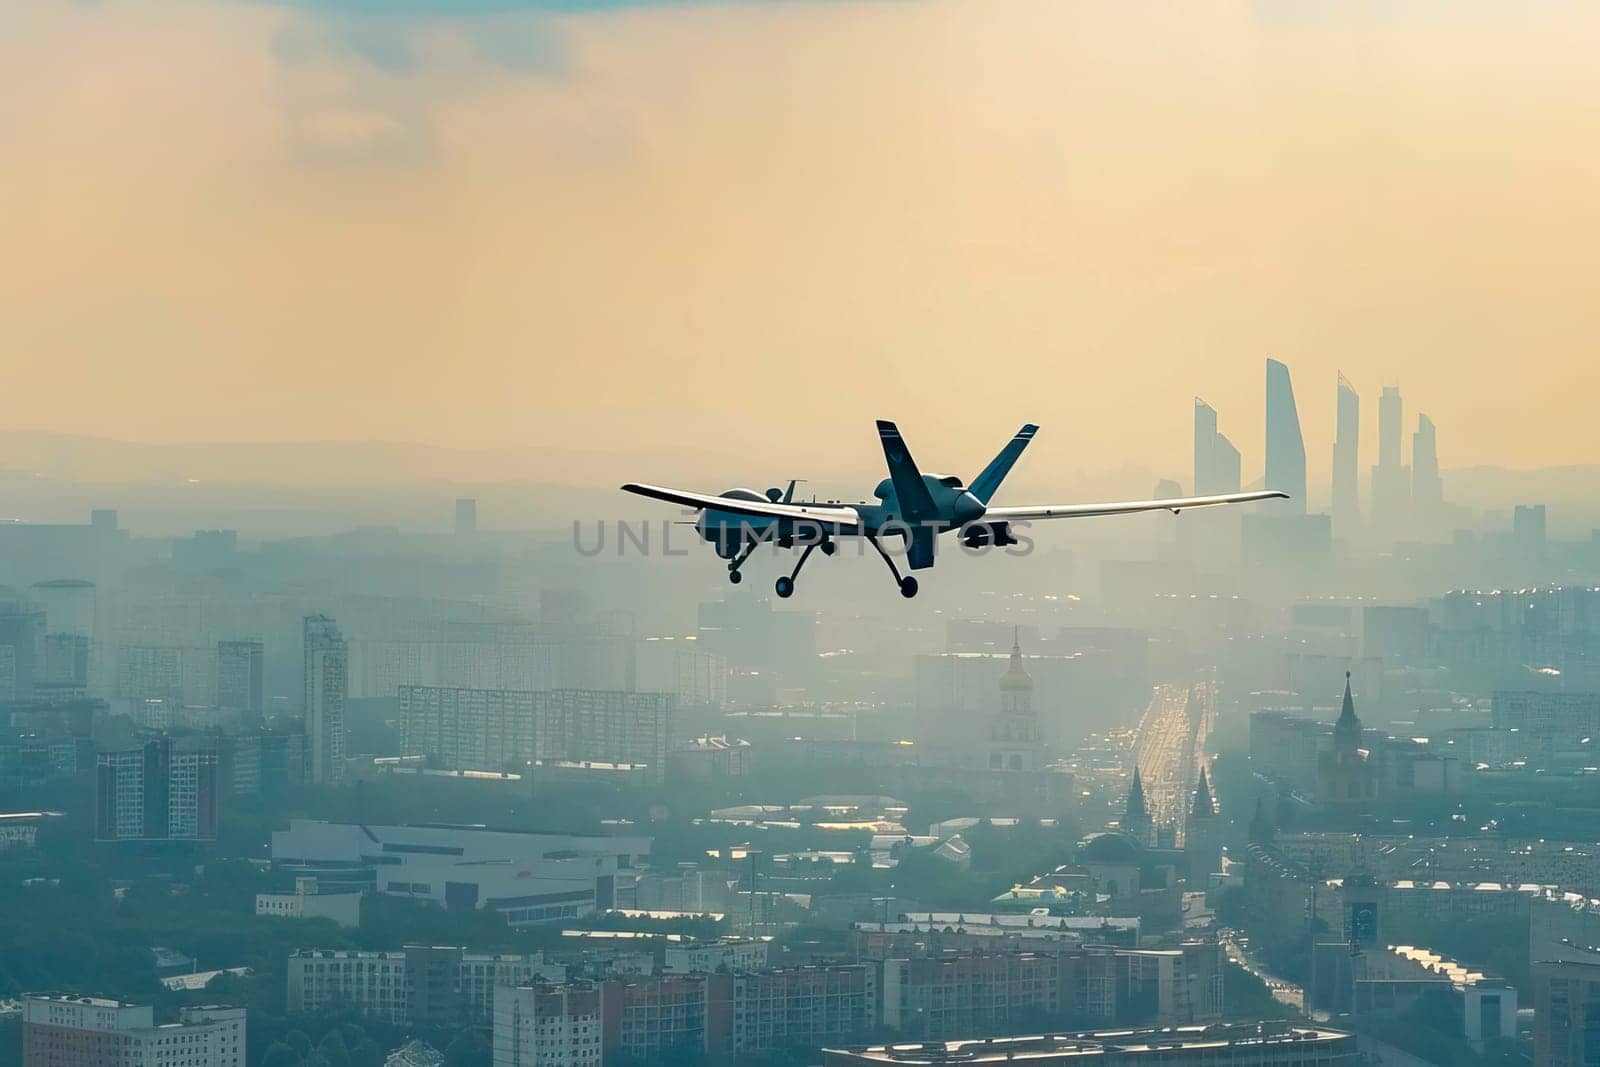 Military unmanned airplane in the air above a cityscape. by vladimka